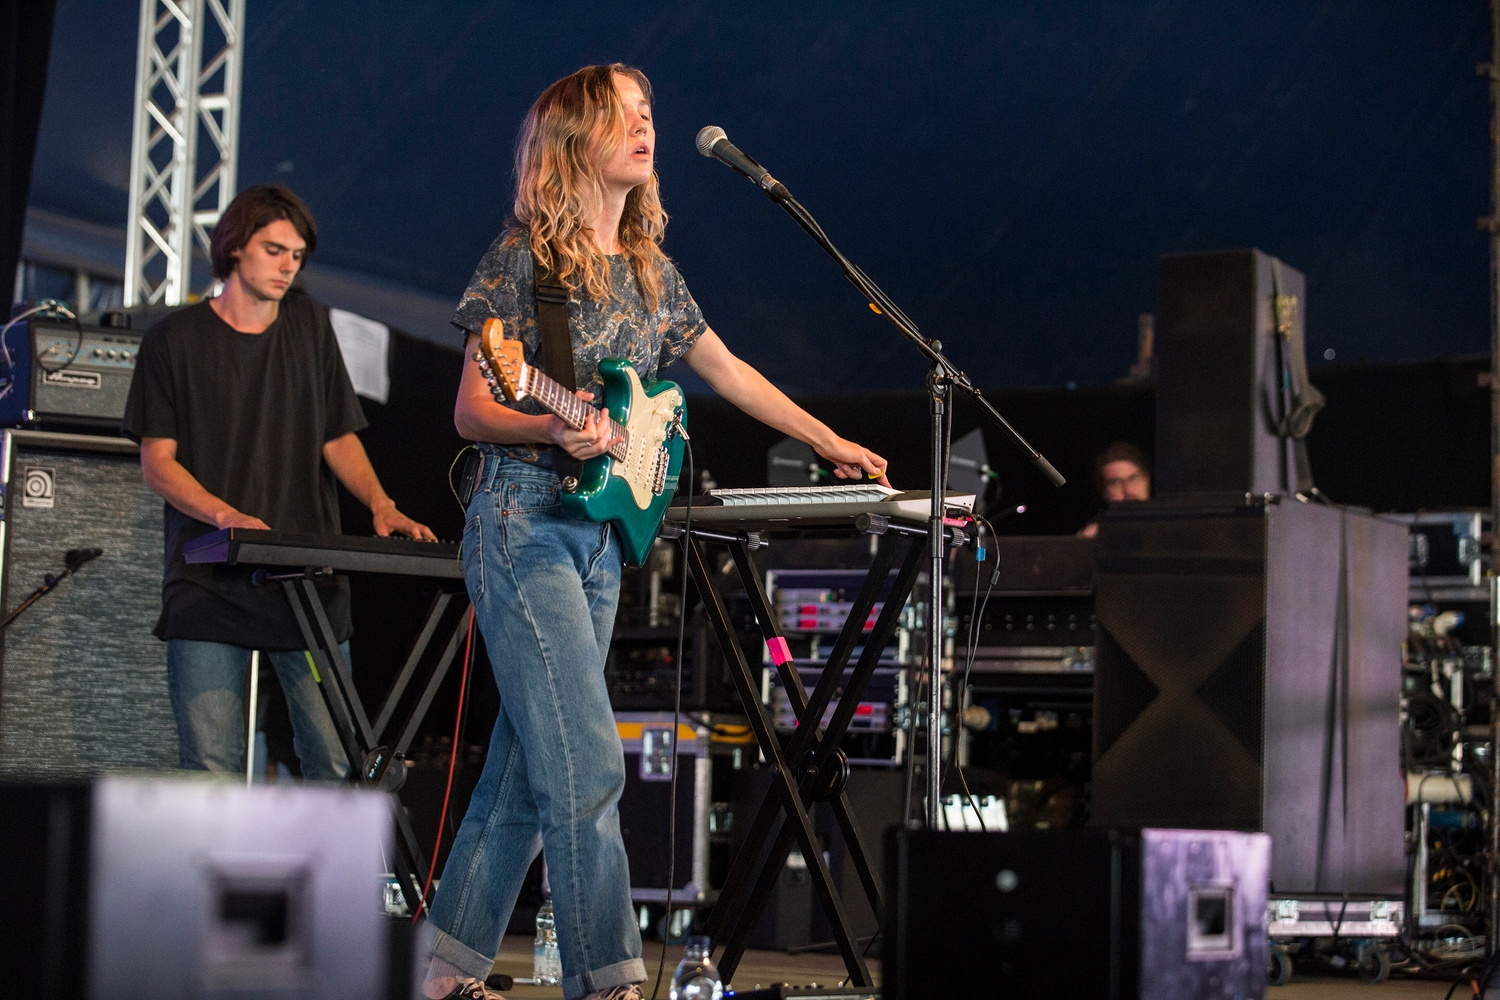 The Japanese House hits the road: "I’m just not nervous at all, which is really weird!"